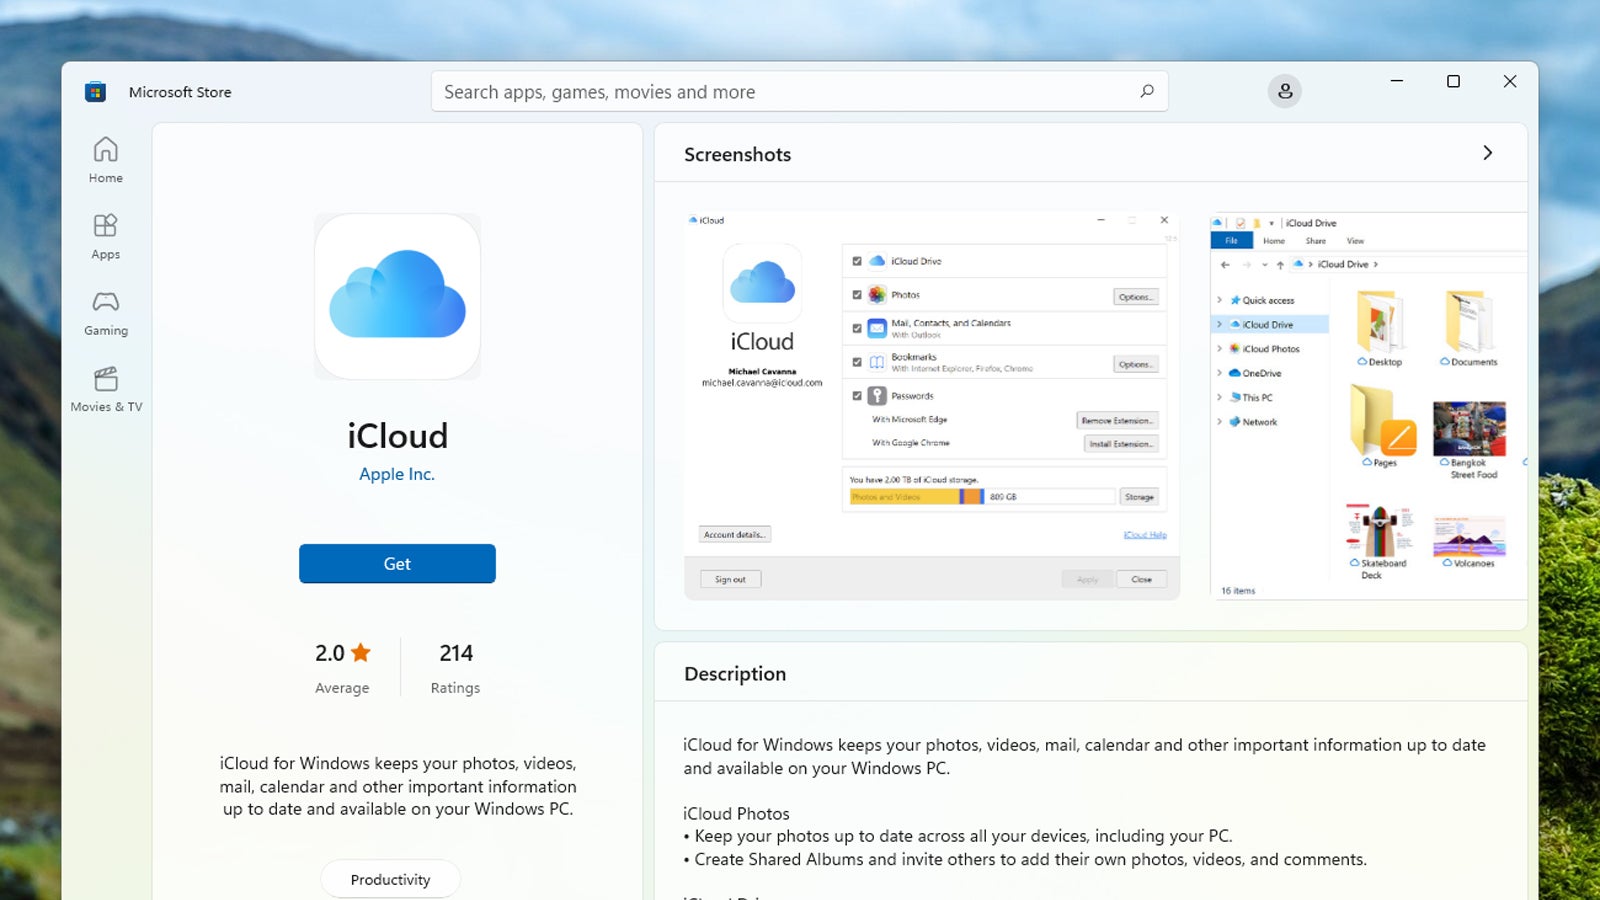 iCloud for Windows is available in the Microsoft Store. (Screenshot: Windows)